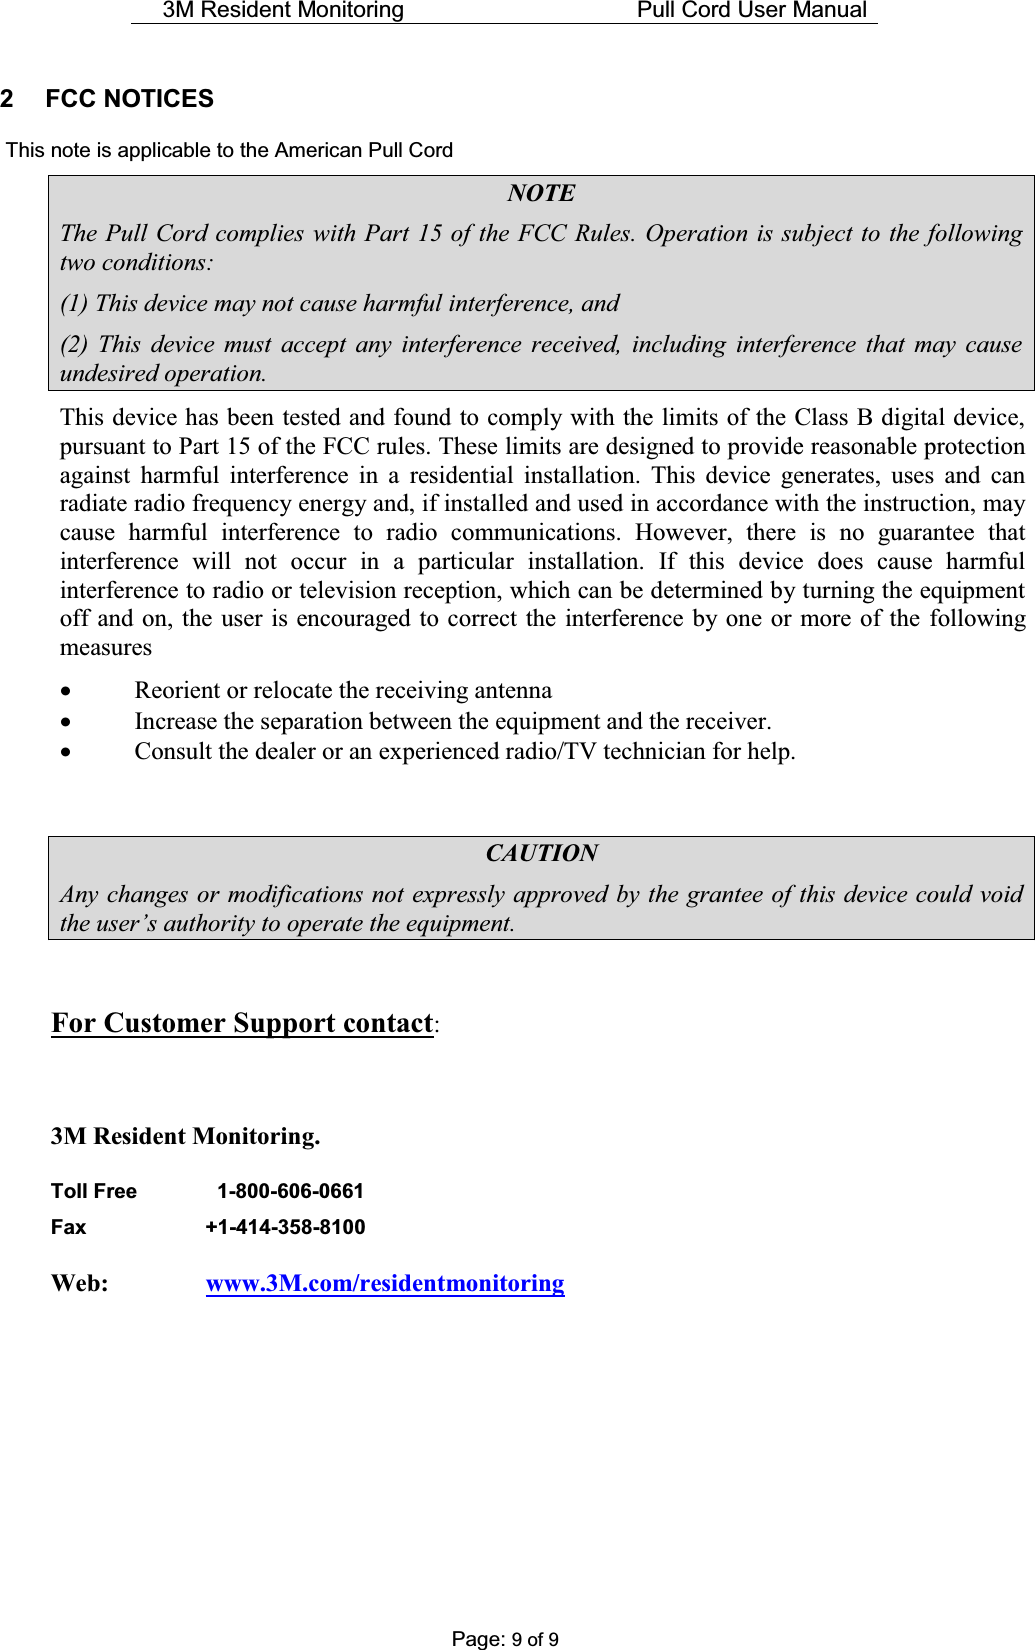 3M Resident Monitoring    Pull Cord User Manual  Page: 9 of 9 2 FCC NOTICES    This note is applicable to the American Pull Cord NOTE The Pull Cord complies with Part 15 of the FCC Rules. Operation is subject to the following two conditions: (1) This device may not cause harmful interference, and (2) This device must accept any interference received, including interference that may cause undesired operation. This device has been tested and found to comply with the limits of the Class B digital device, pursuant to Part 15 of the FCC rules. These limits are designed to provide reasonable protection against harmful interference in a residential installation. This device generates, uses and can radiate radio frequency energy and, if installed and used in accordance with the instruction, may cause harmful interference to radio communications. However, there is no guarantee that interference will not occur in a particular installation. If this device does cause harmful interference to radio or television reception, which can be determined by turning the equipment off and on, the user is encouraged to correct the interference by one or more of the following measures x Reorient or relocate the receiving antenna x Increase the separation between the equipment and the receiver. x Consult the dealer or an experienced radio/TV technician for help.   CAUTION Any changes or modifications not expressly approved by the grantee of this device could void WKHXVHU¶VDXWKRULW\WRRSHUDWHWKHHTXLSPHQW  For Customer Support contact:  3M Resident Monitoring. Toll Free      1-800-606-0661  Fax   +1-414-358-8100  Web:     www.3M.com/residentmonitoring       